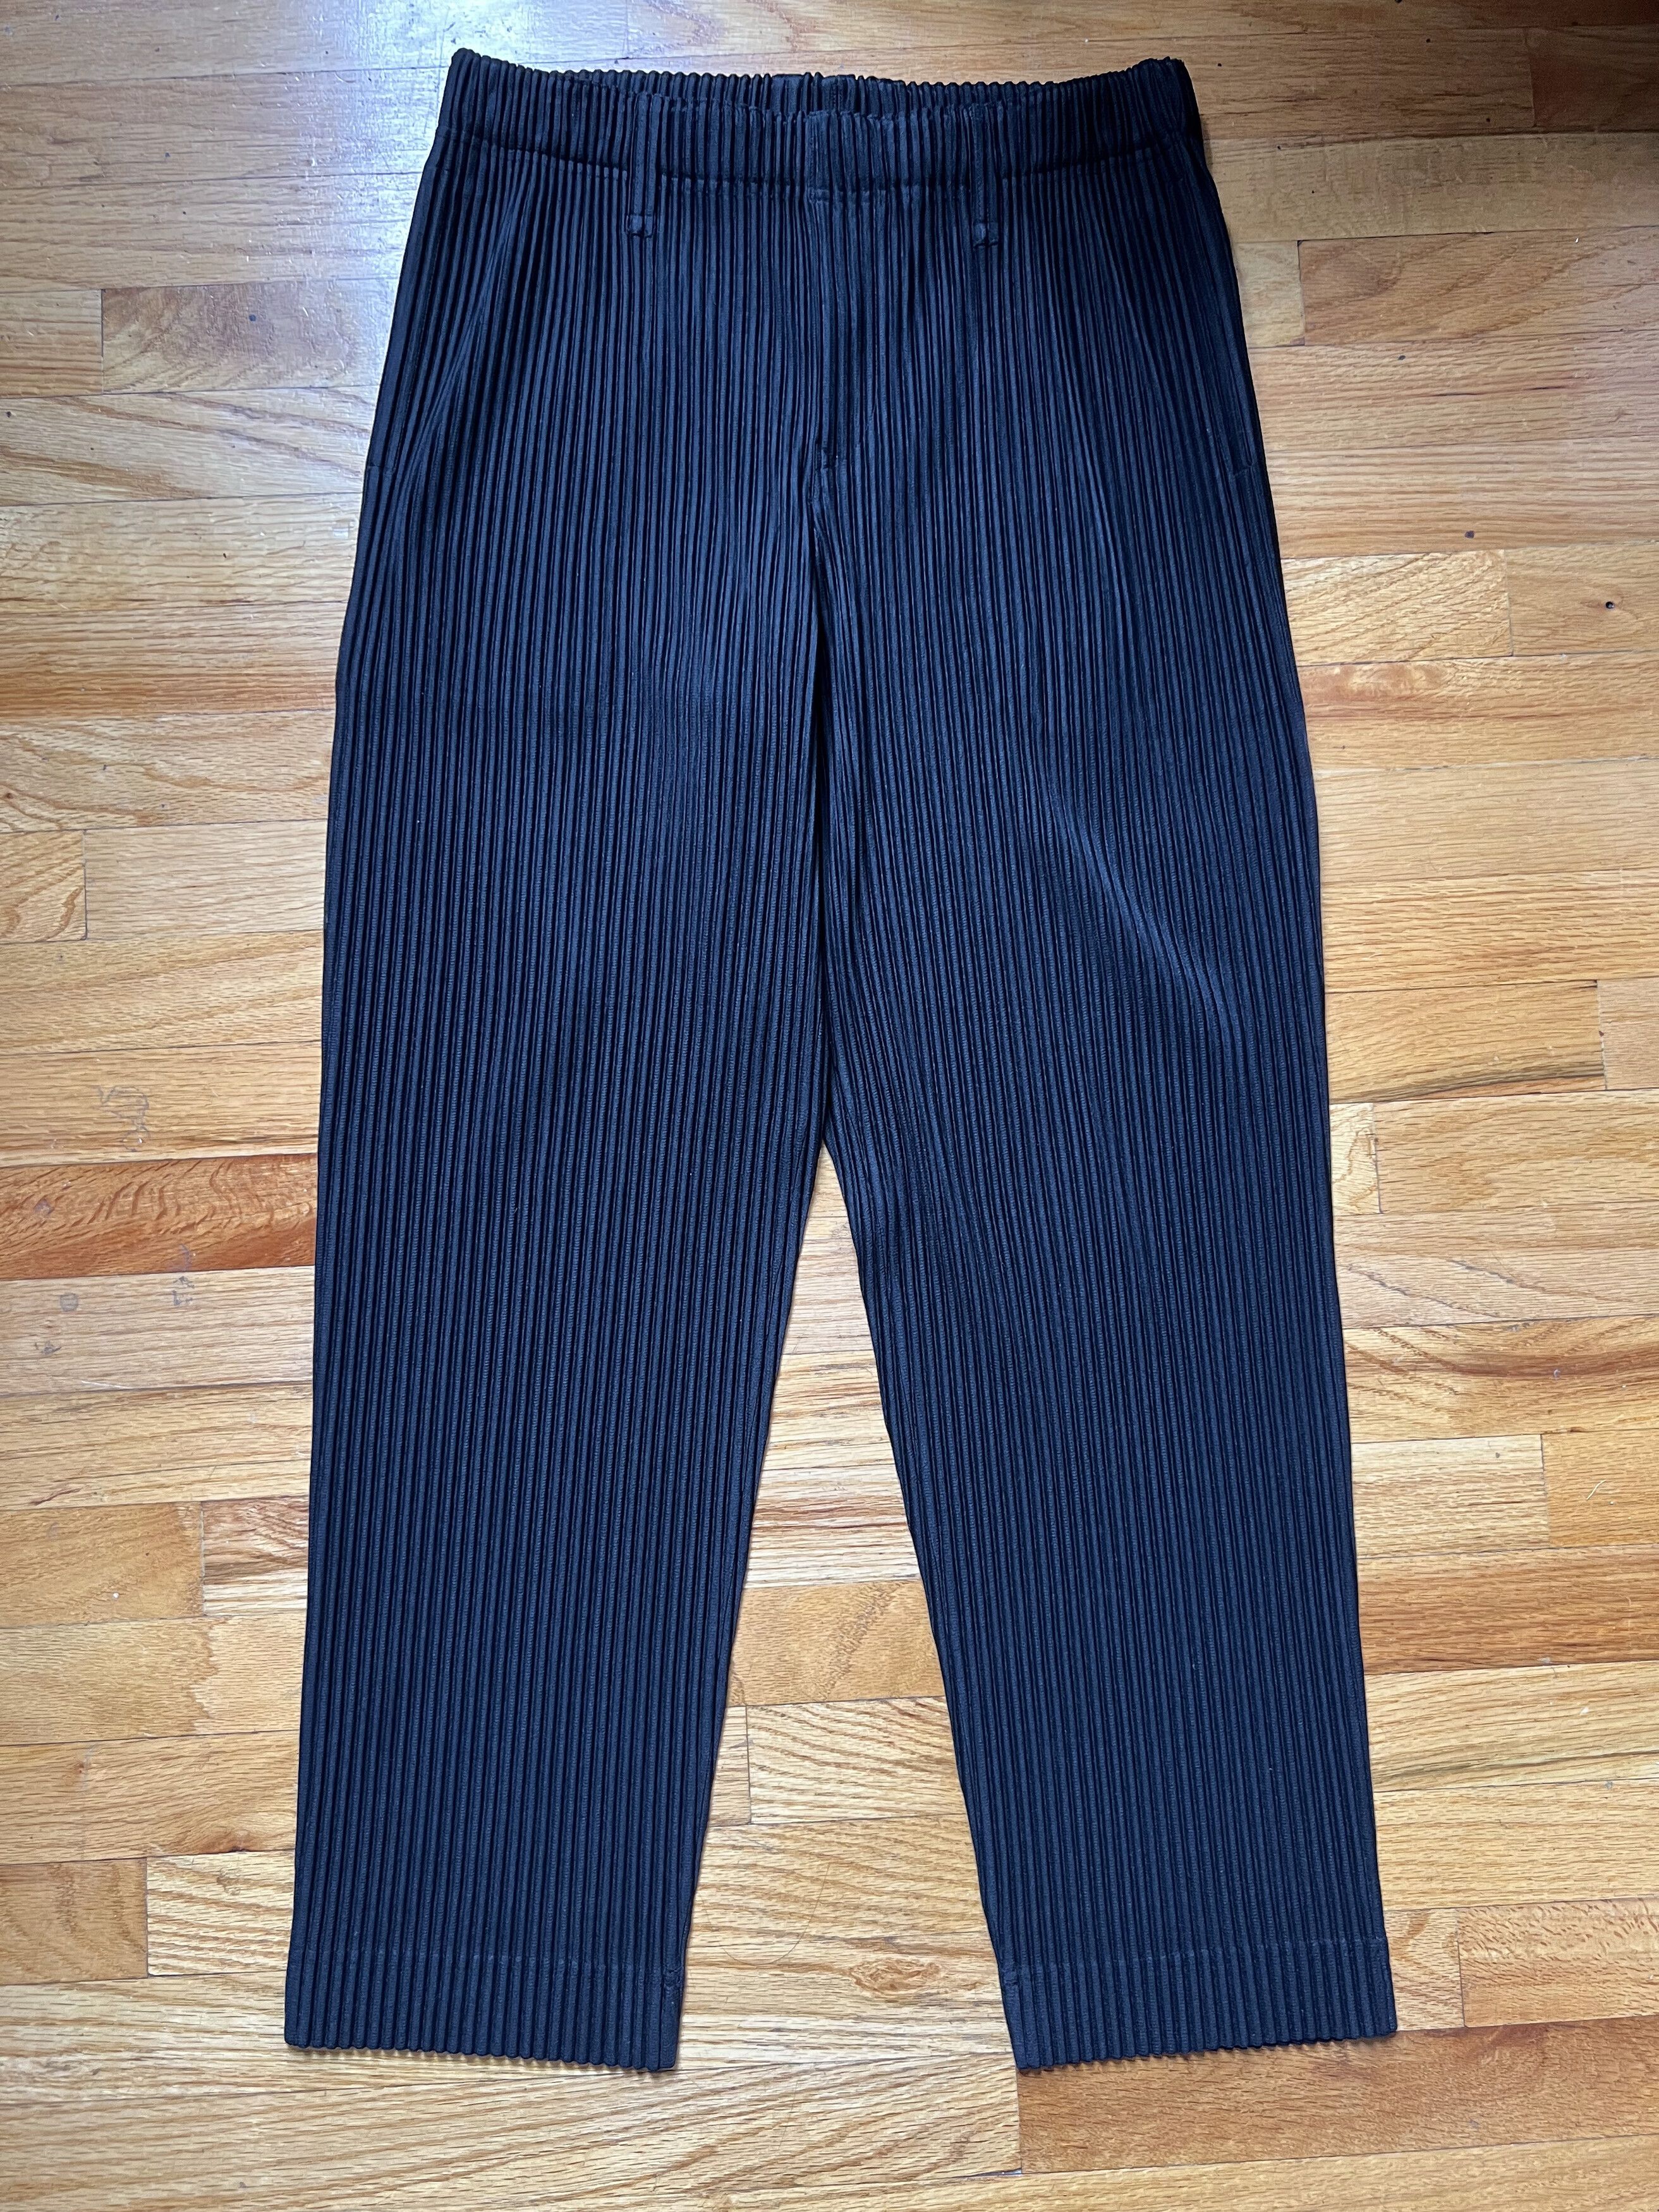 Homme Plisse Issey Miyake JF150 Straight Fit Pleated Pants | Grailed